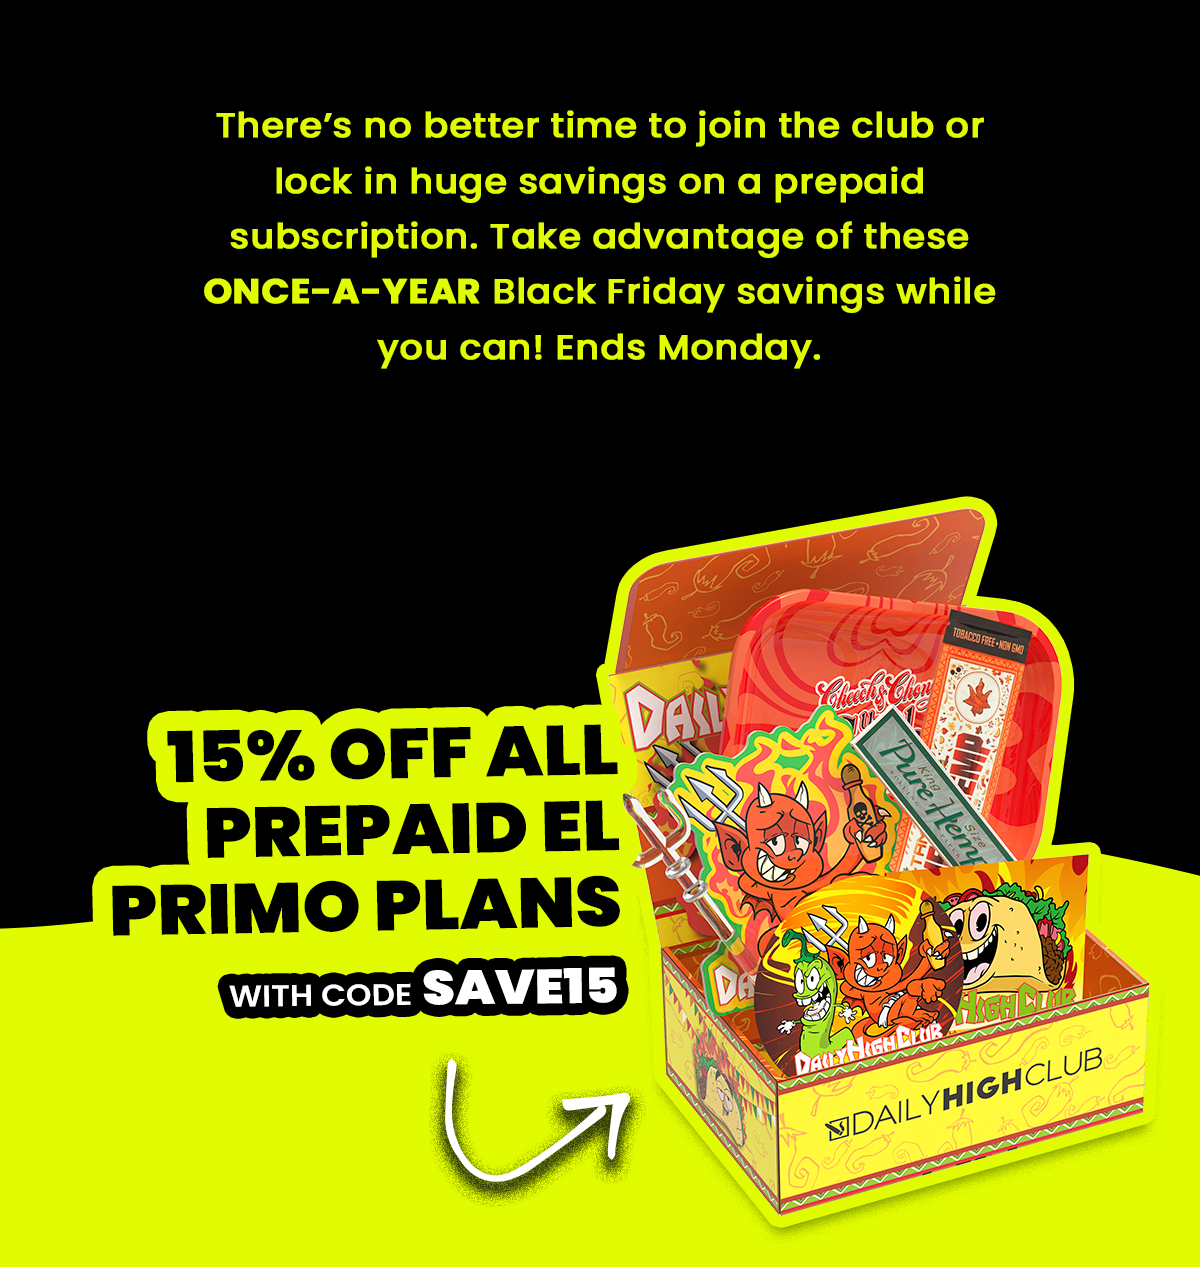 15% OFF ALL PREPAID EL PRIMO PLANS With code SAVE15